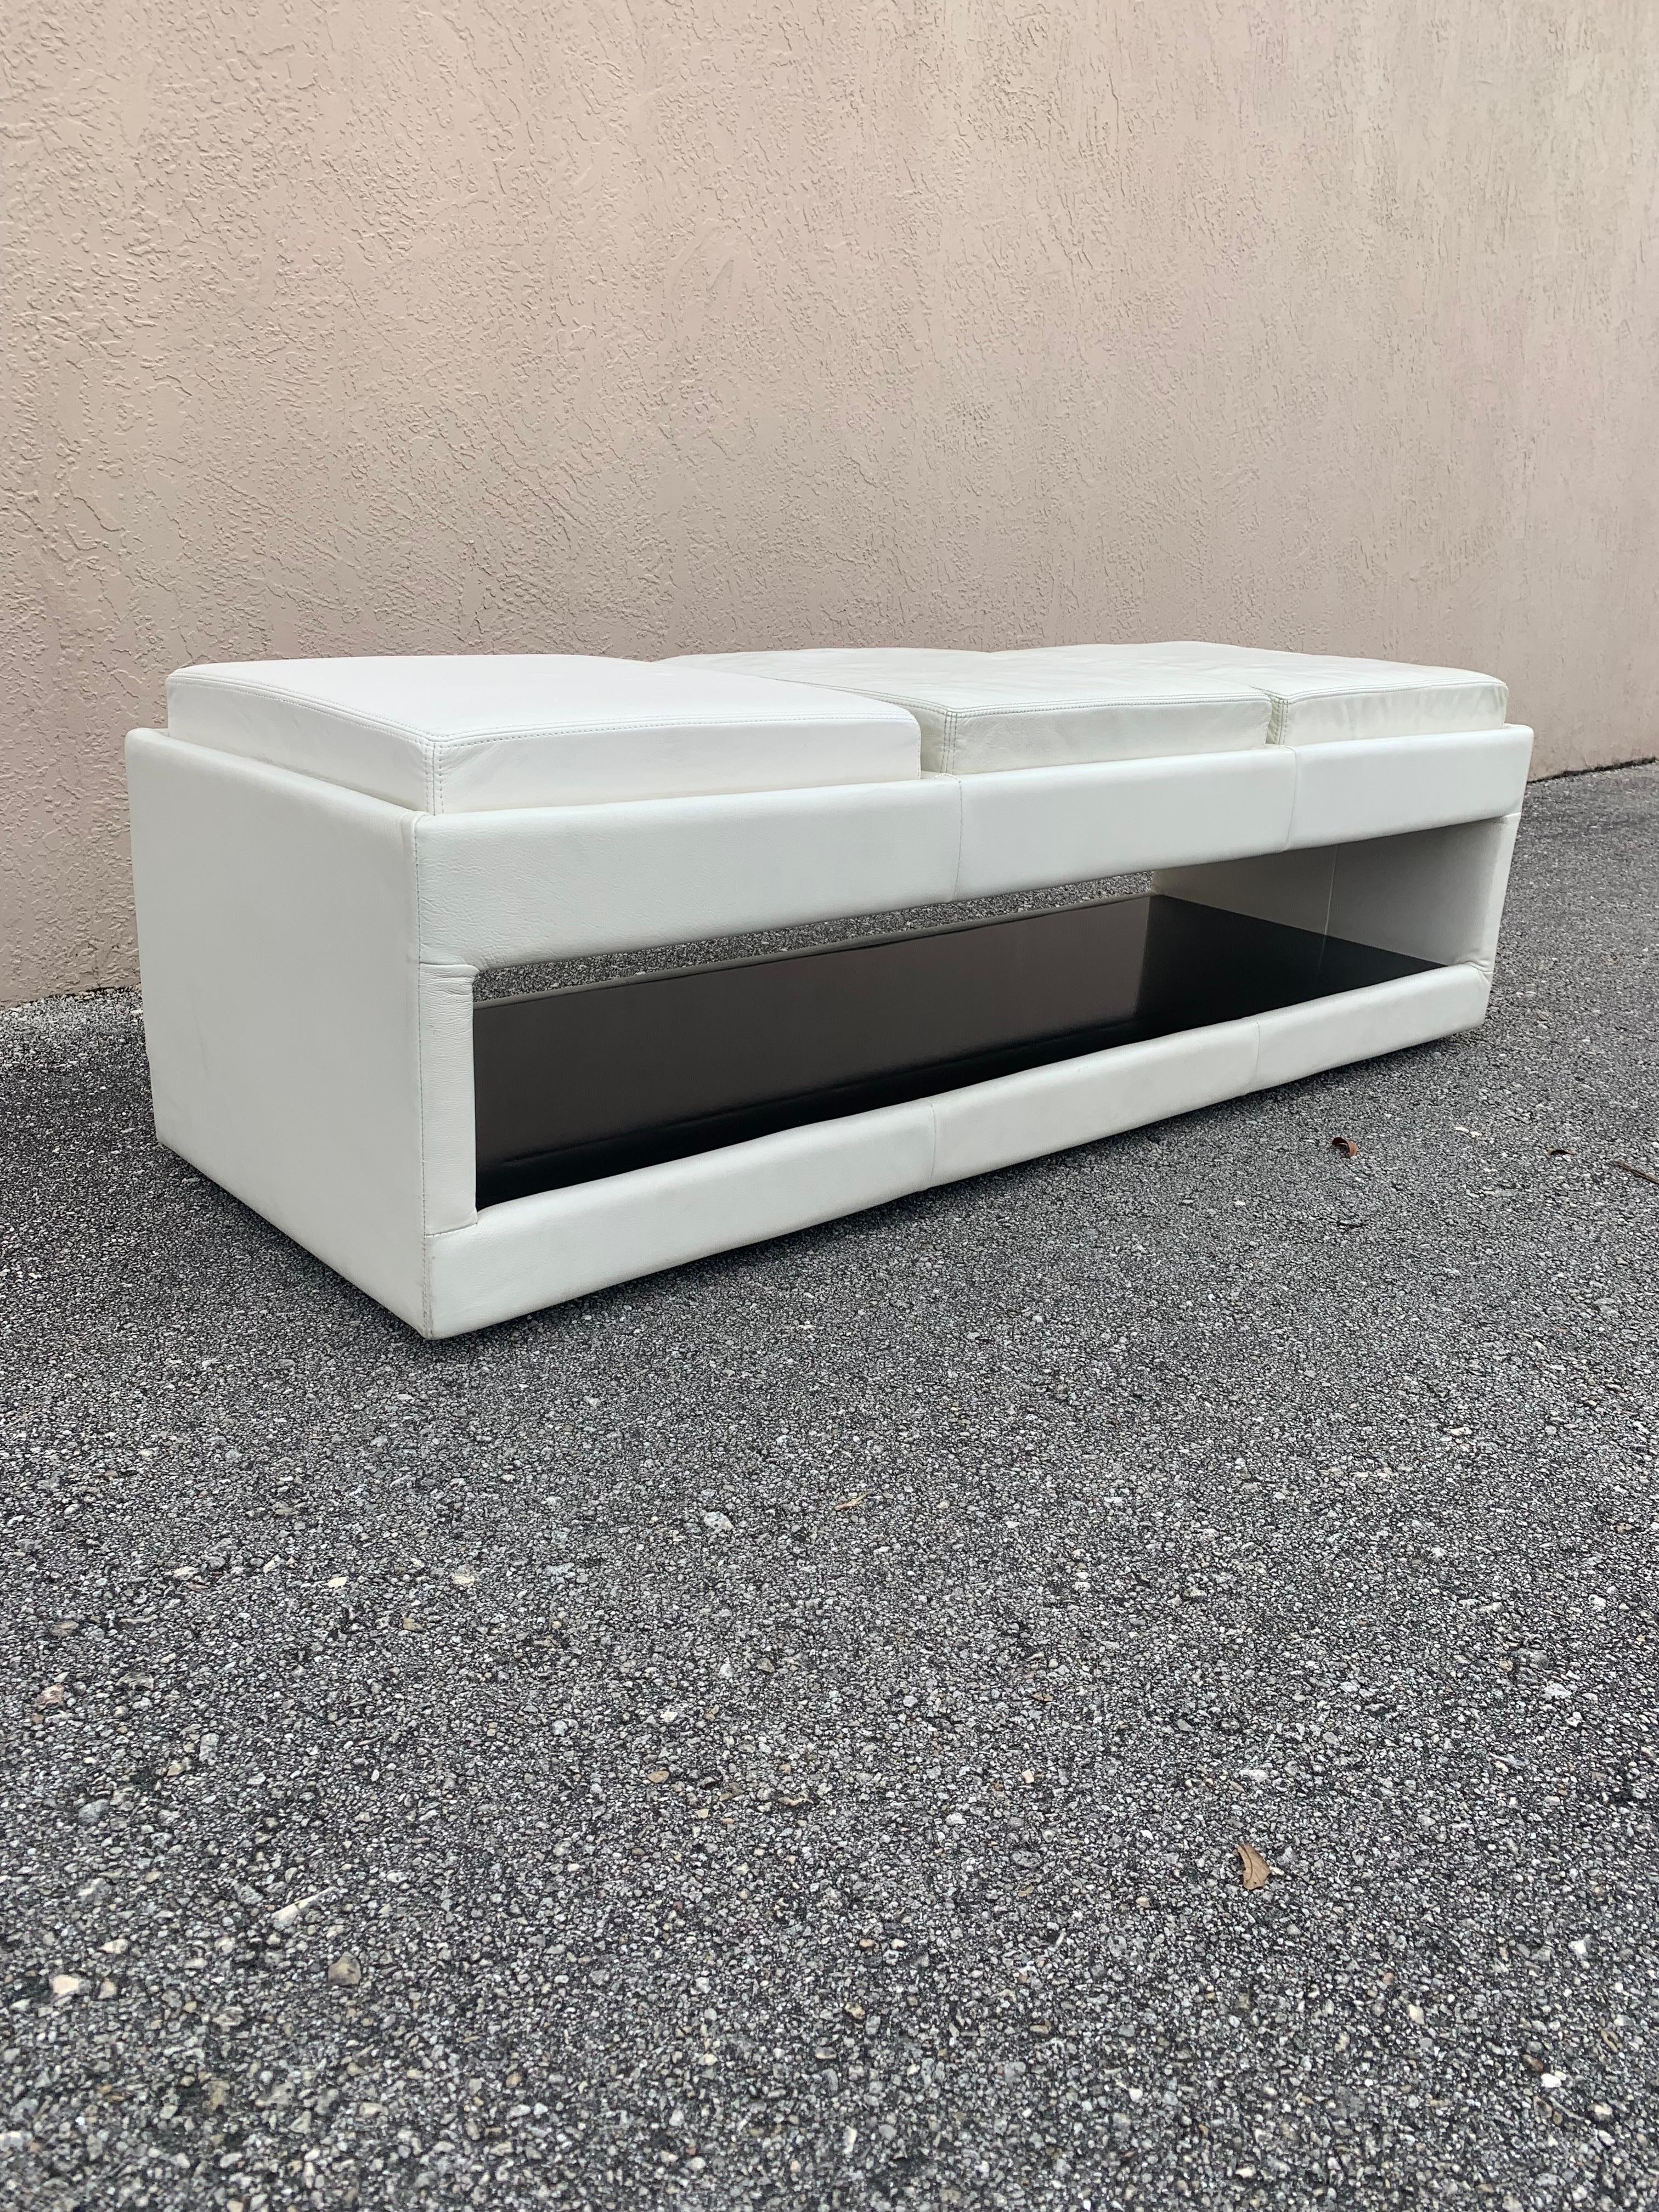 American Leather 3 Seat Benches in White, a Pair For Sale 2